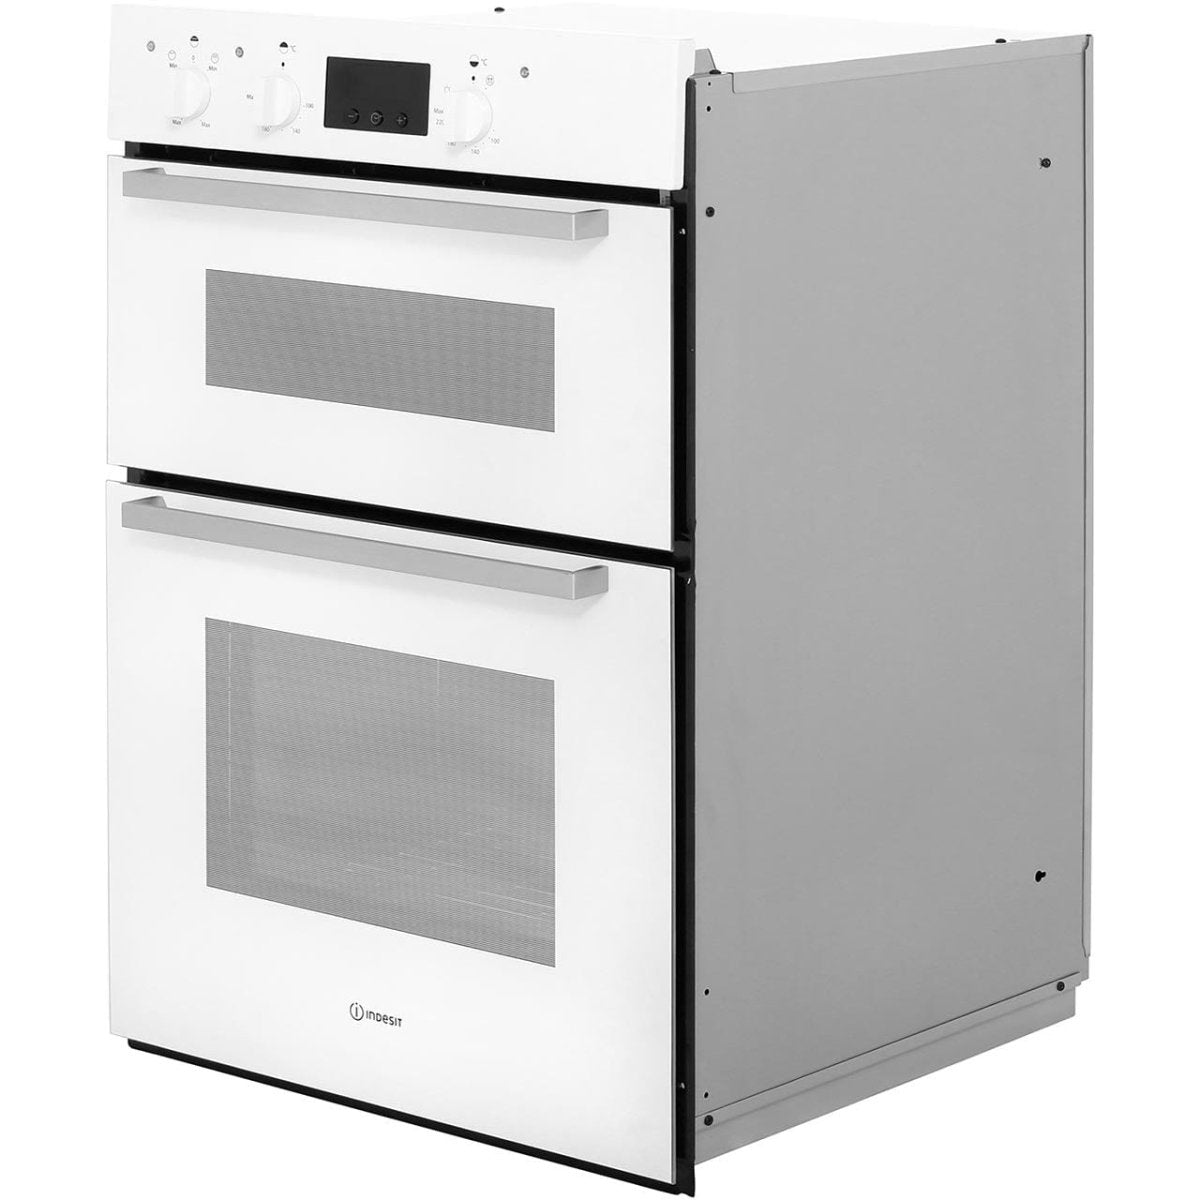 Indesit Aria IDD6340WH Built In Electric Double Oven - White - A/A Rated - Atlantic Electrics